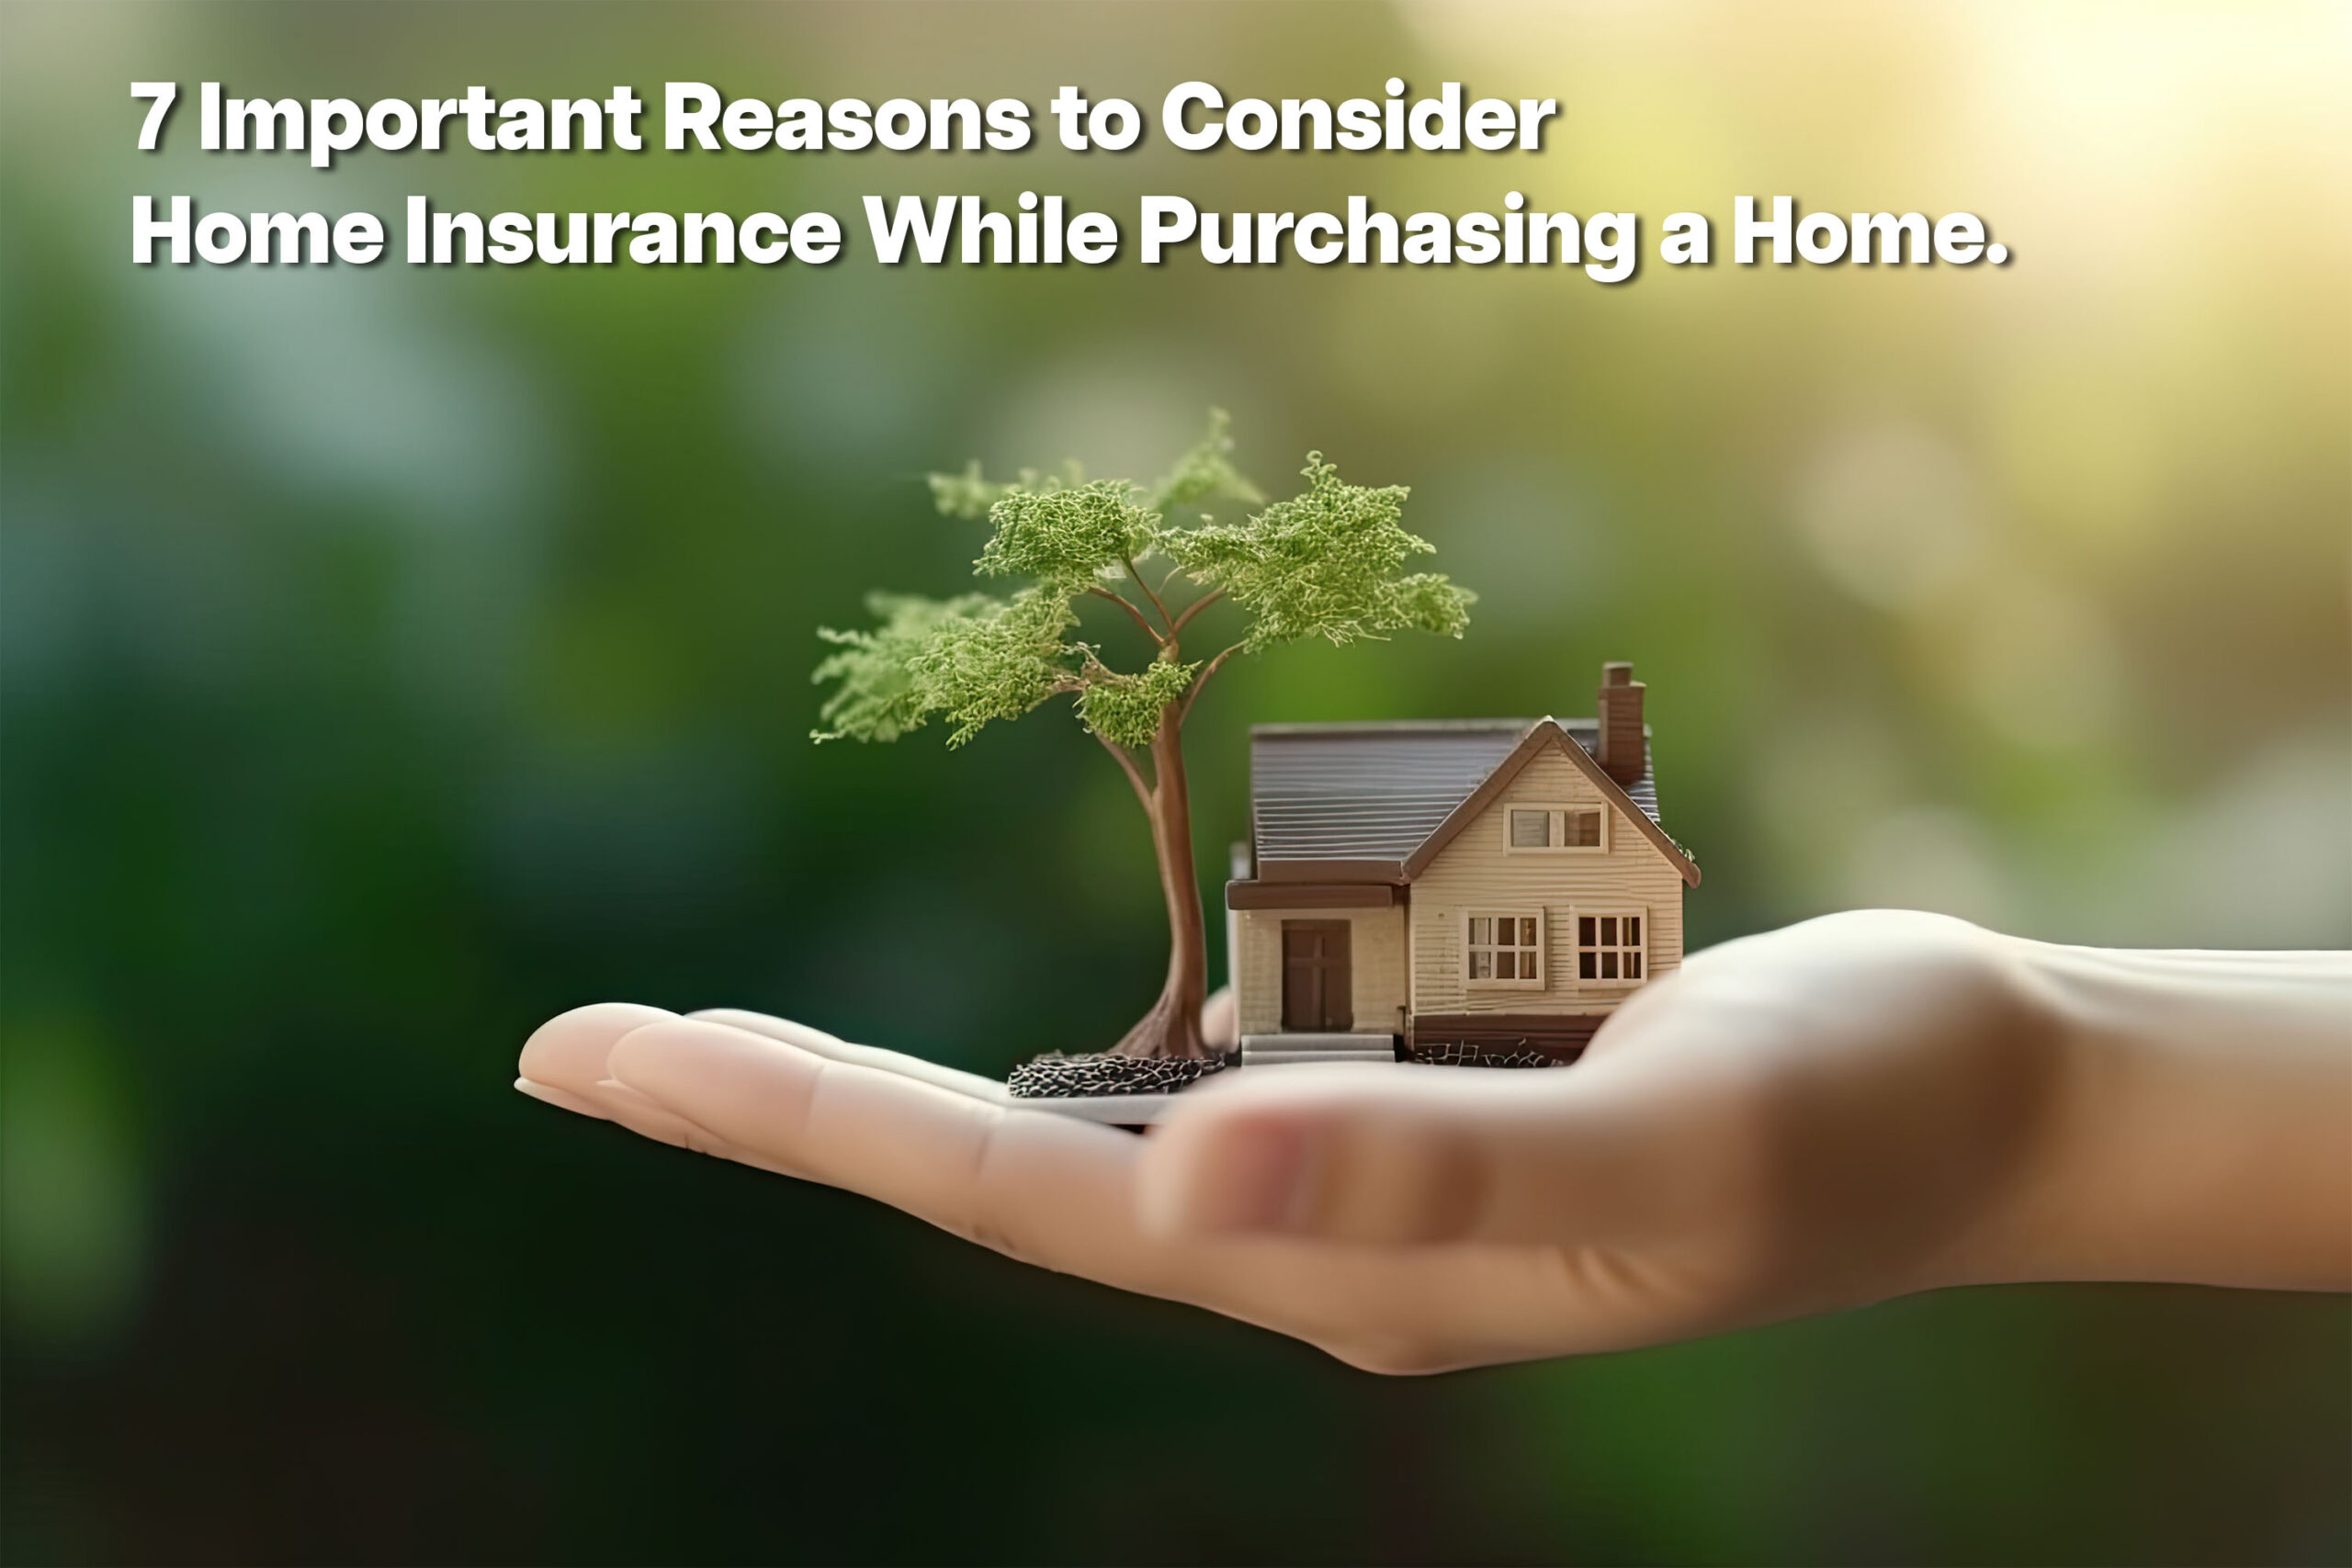 7 Important Reasons to Consider_Home Insurance While Purchasing a Home